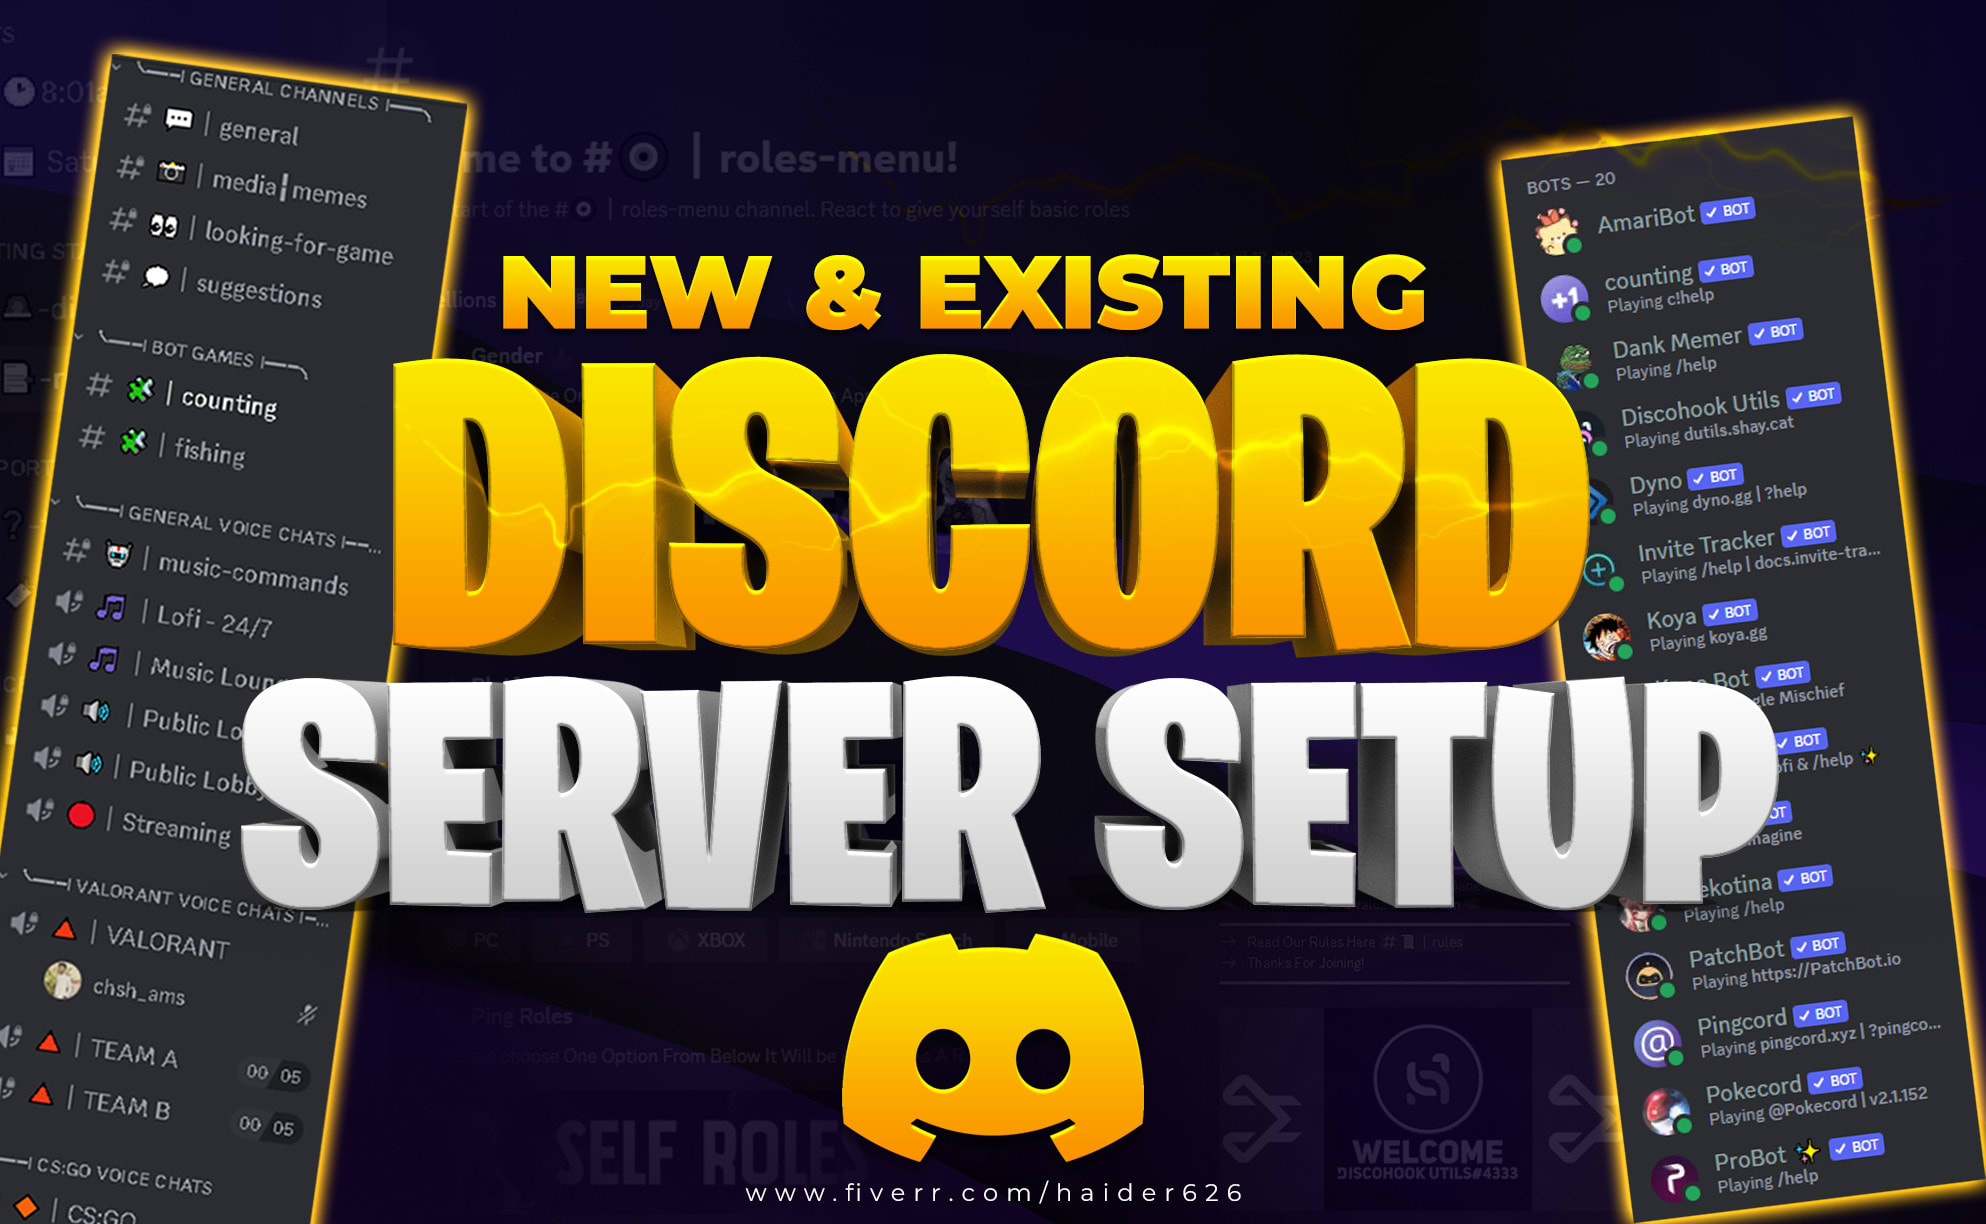 make you a professional discord server within 48 hours